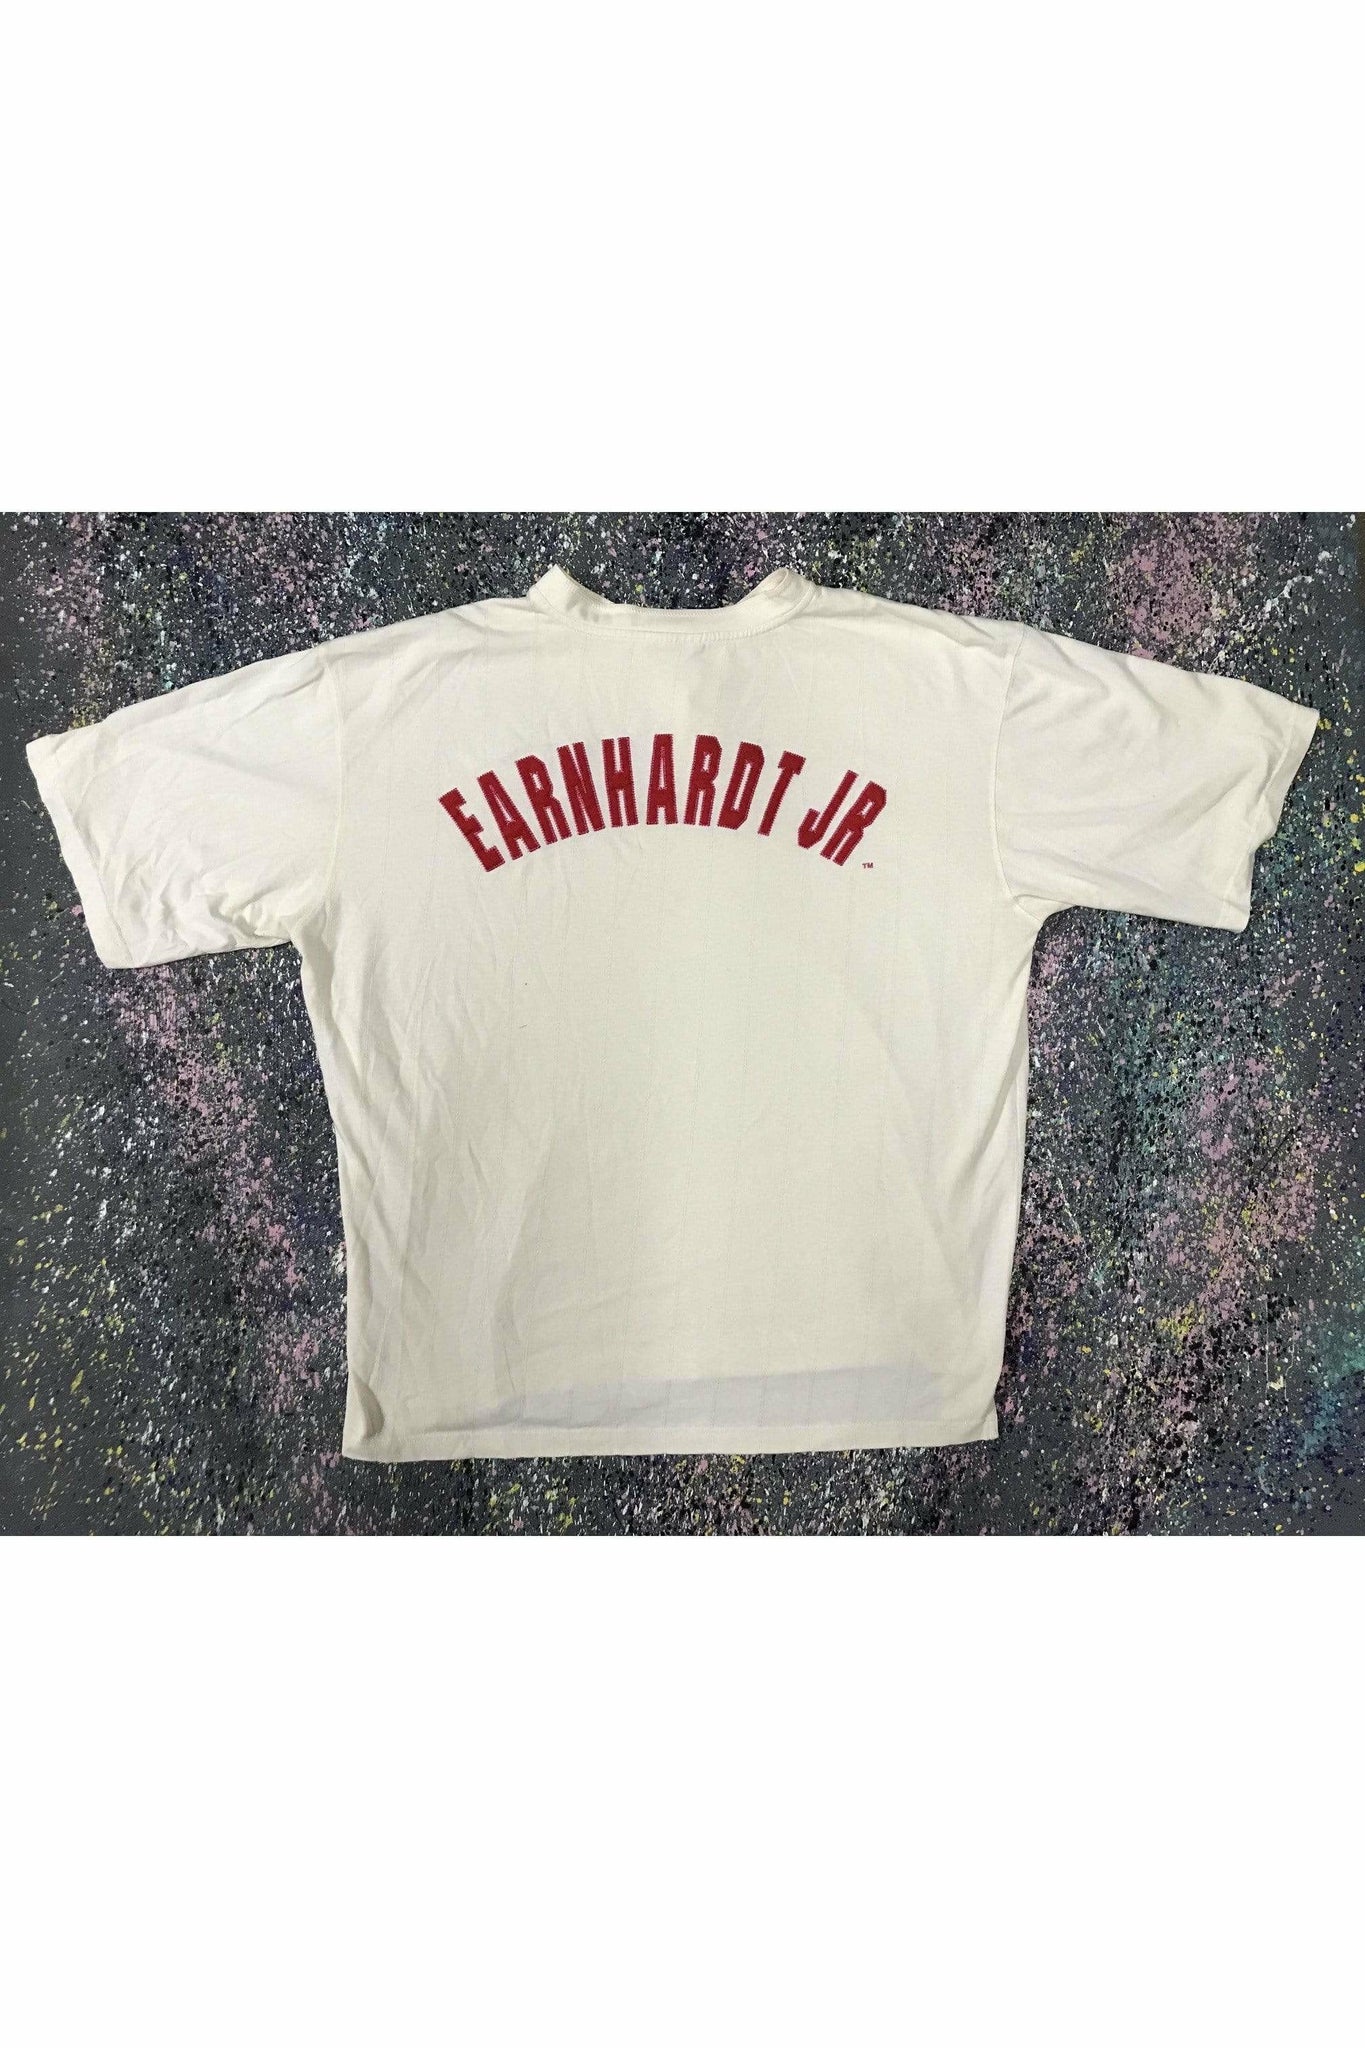 Dale Earnhardt Jr. Chase Authentic’s Tee- XL